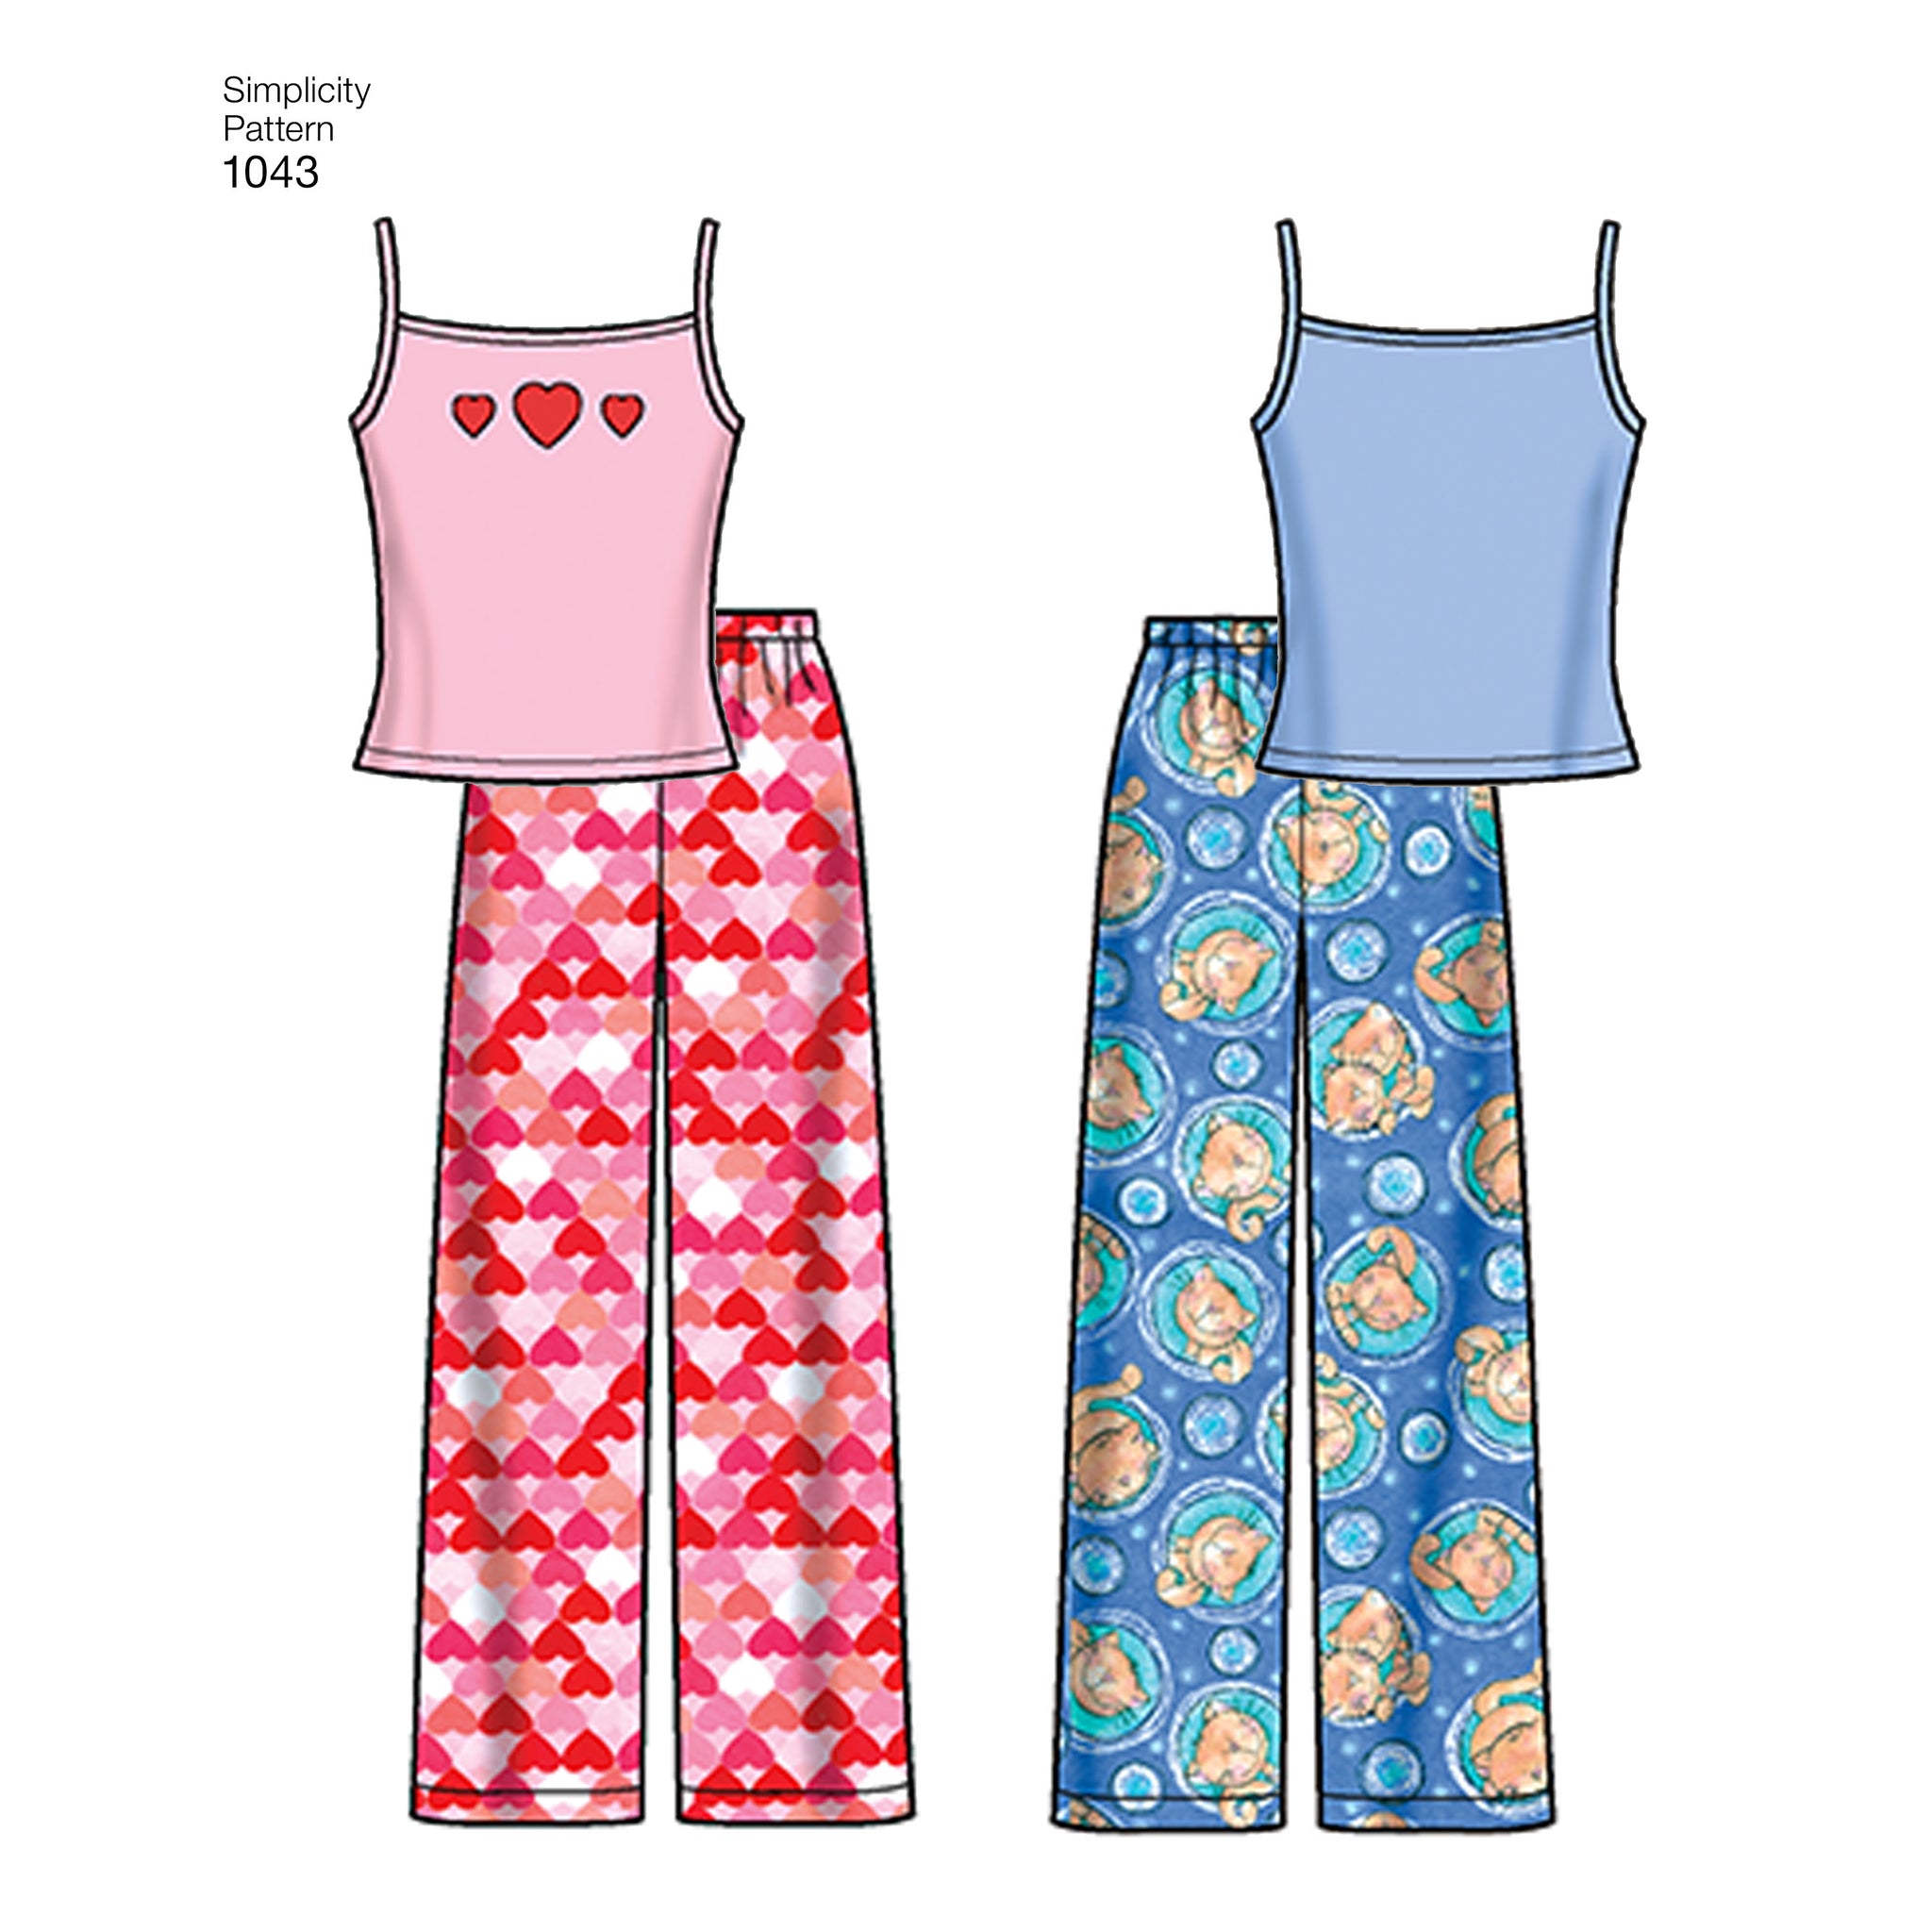 https://threadsmonthly.com/wp-content/uploads/2021/03/unisex-pull-on-pajama- pants-sewing-pattern-famil… | Pants pattern free, Stylish sewing patterns, Pants  pattern